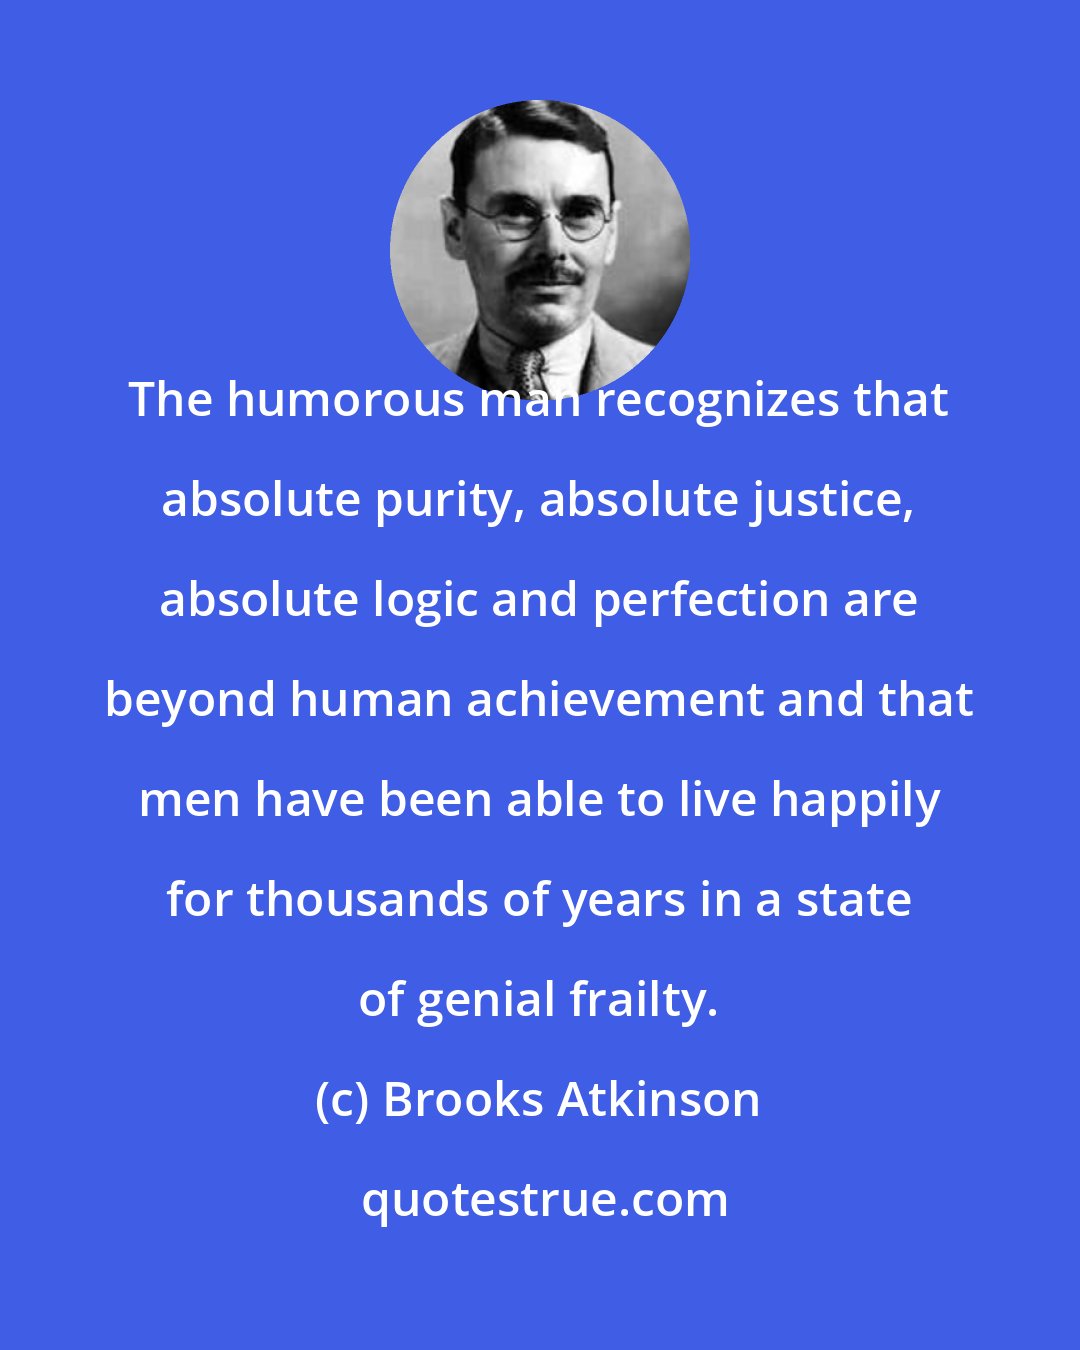 Brooks Atkinson: The humorous man recognizes that absolute purity, absolute justice, absolute logic and perfection are beyond human achievement and that men have been able to live happily for thousands of years in a state of genial frailty.